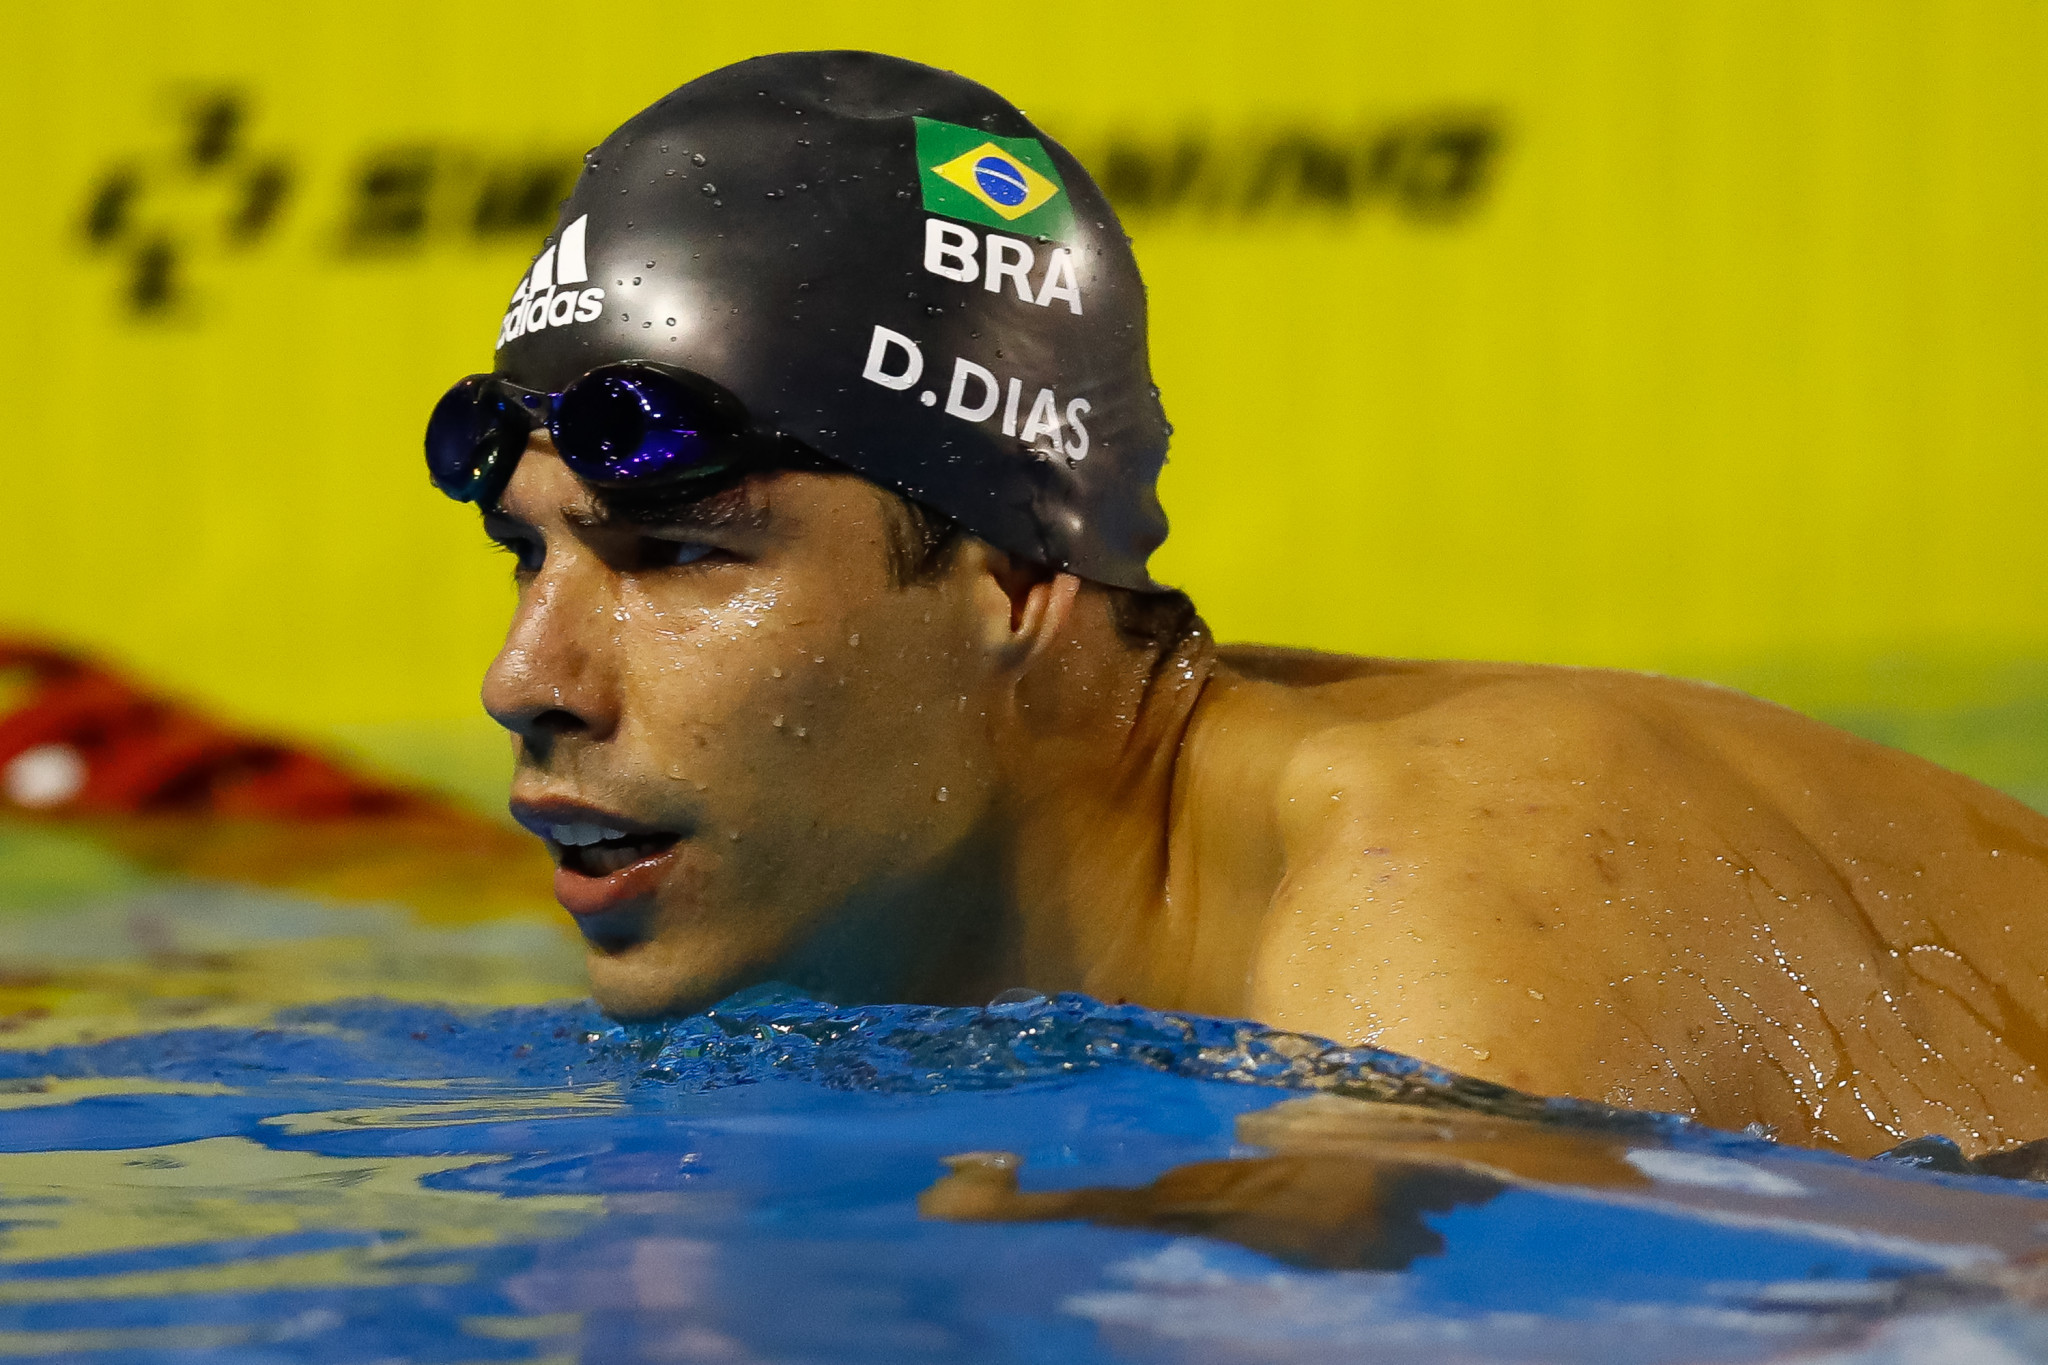 Brazil's Daniel Dias came away with the overall men’s title in the 2017 World Para Swimming World Series ©Getty Images